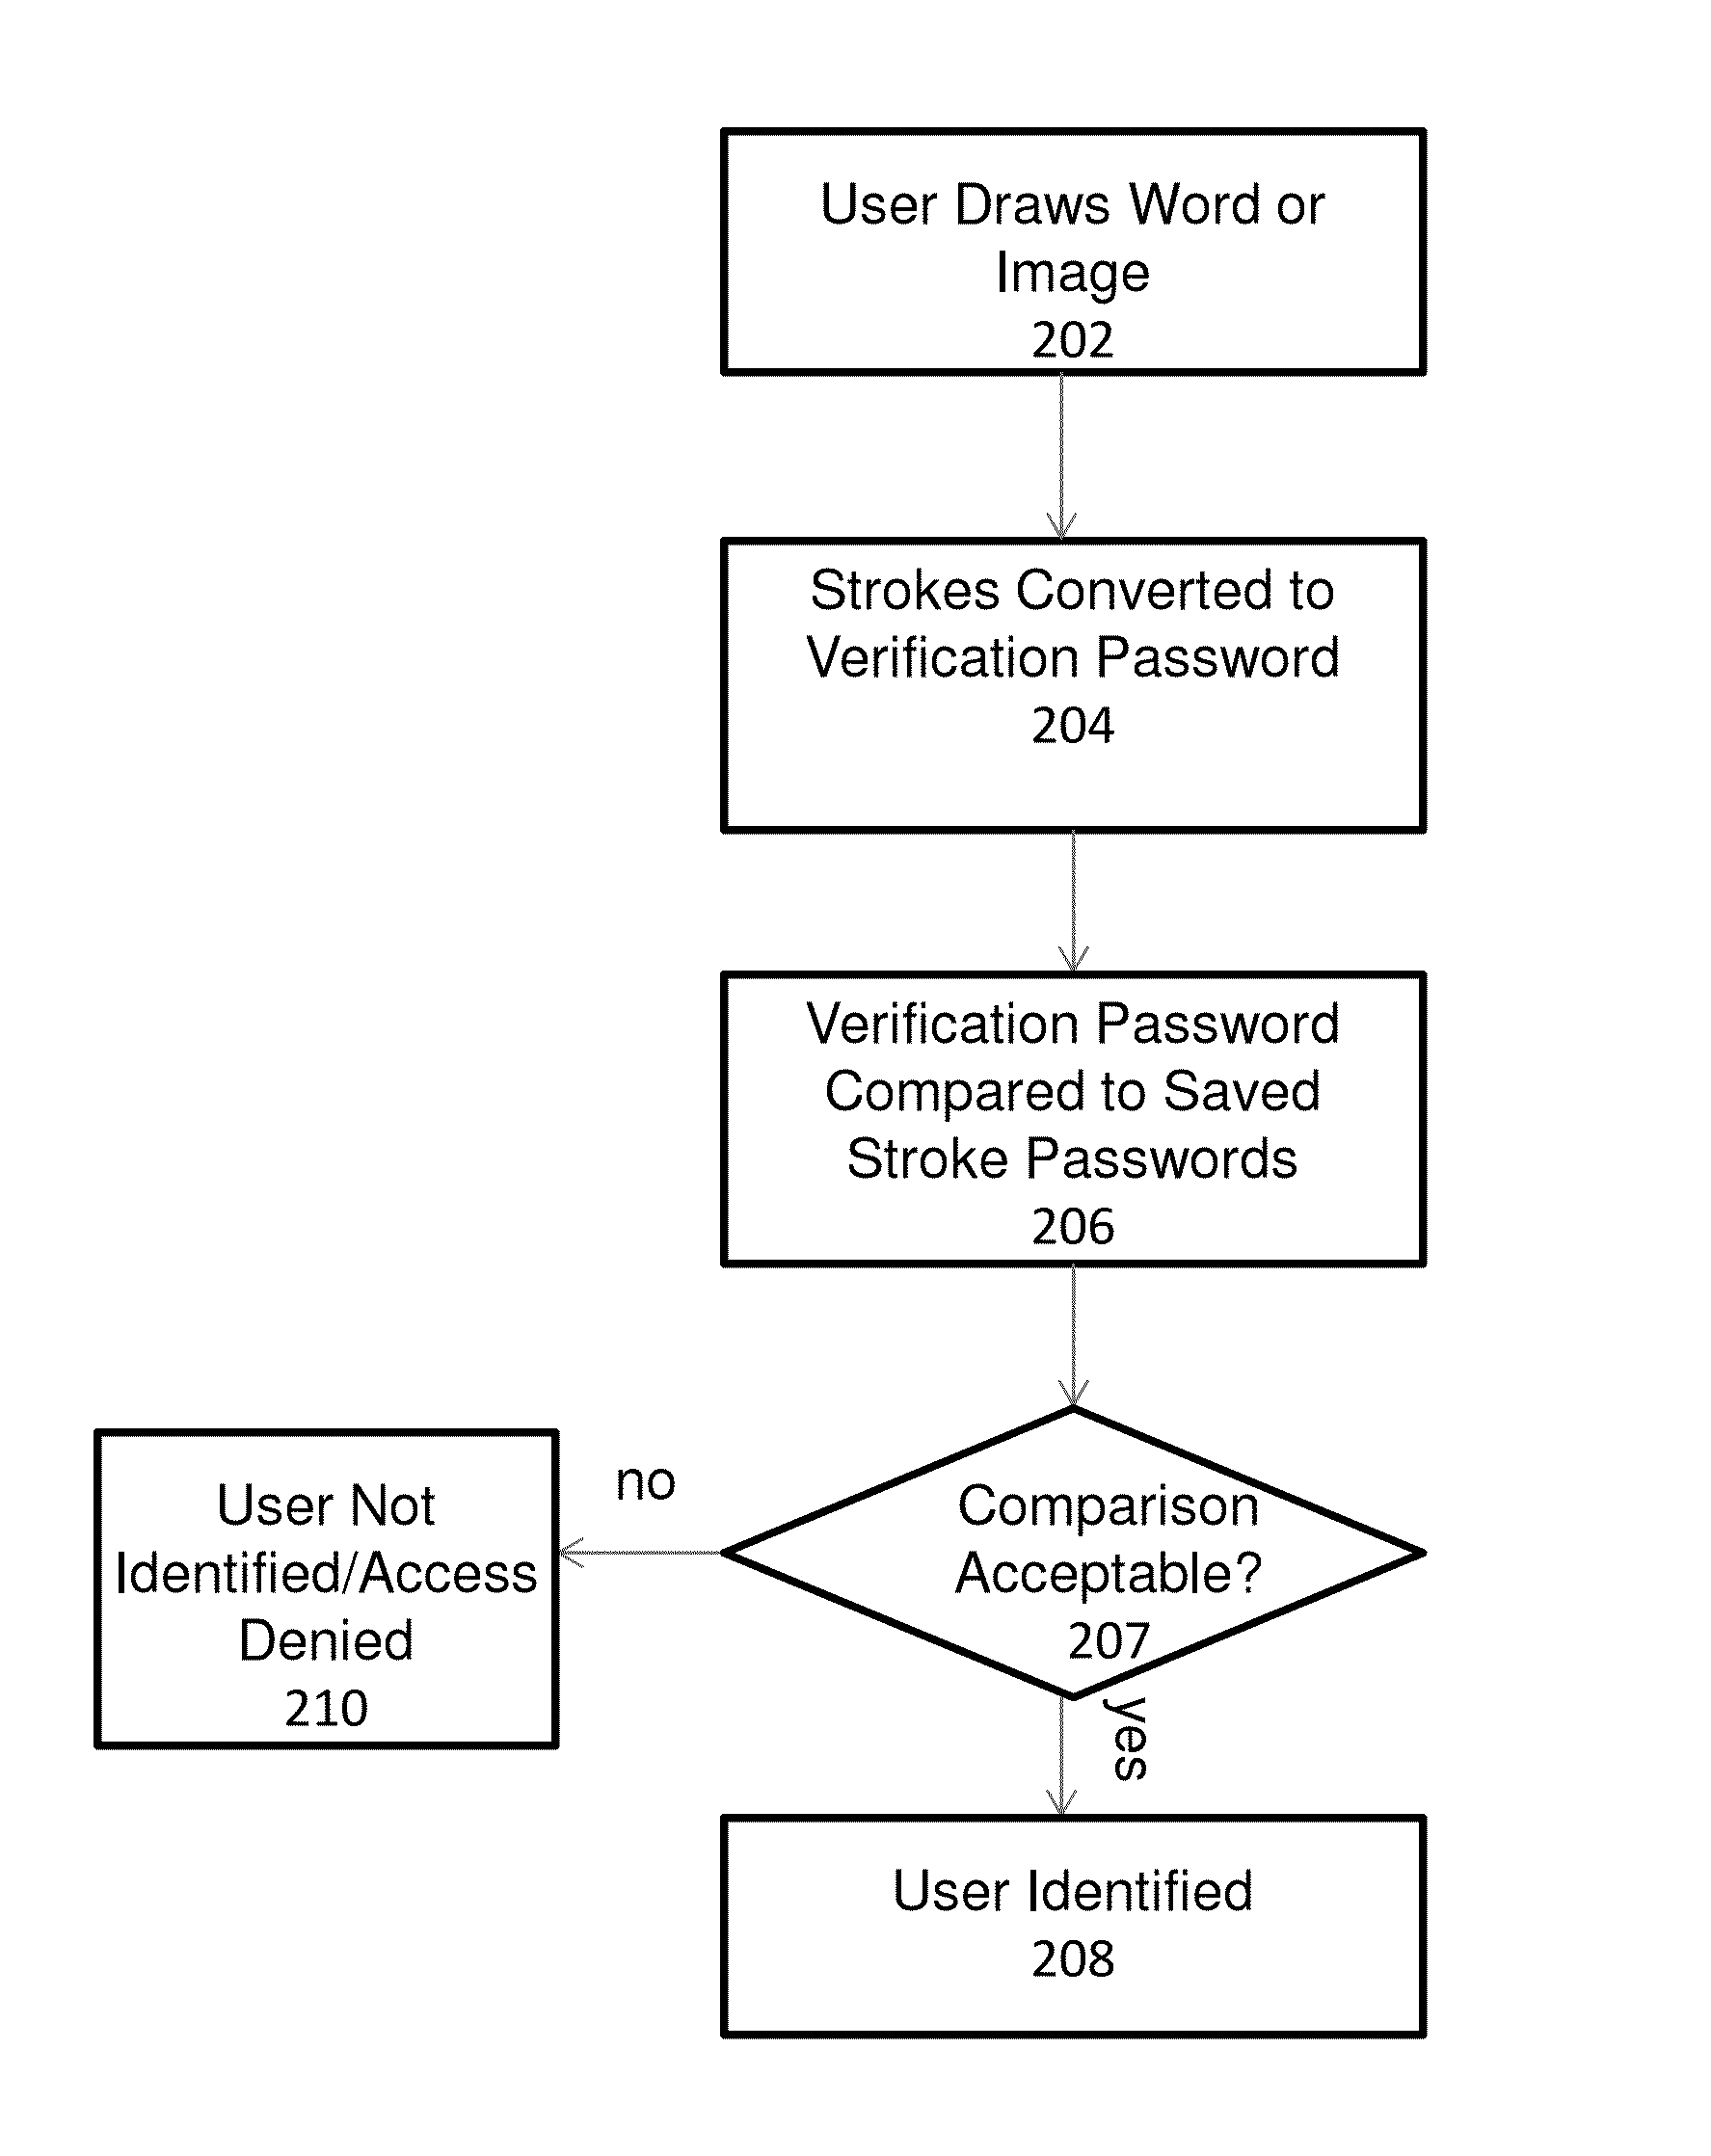 System and method for providing gesture-based user identification